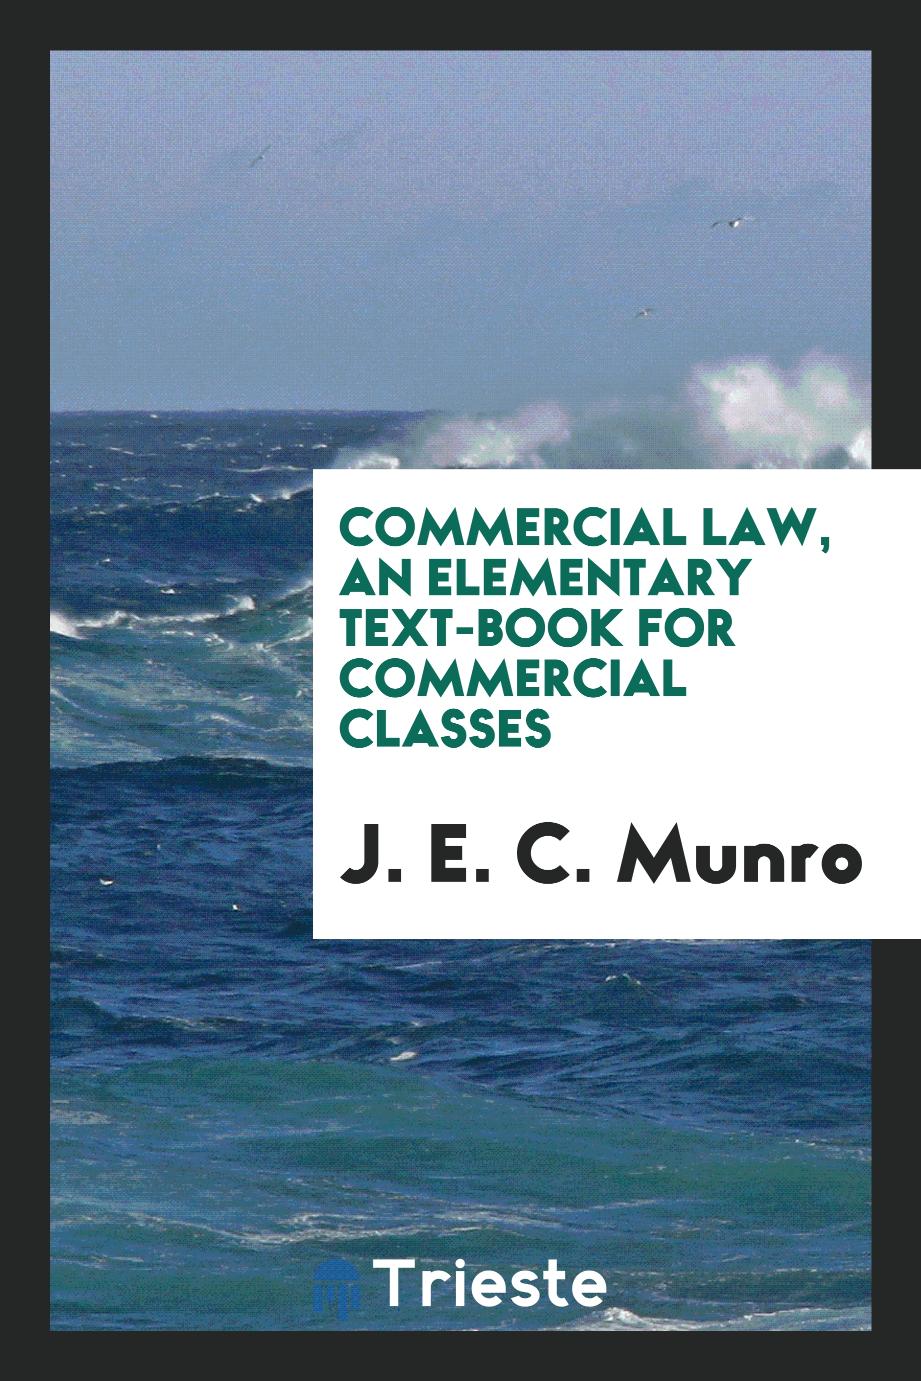 Commercial law, an elementary text-book for commercial classes